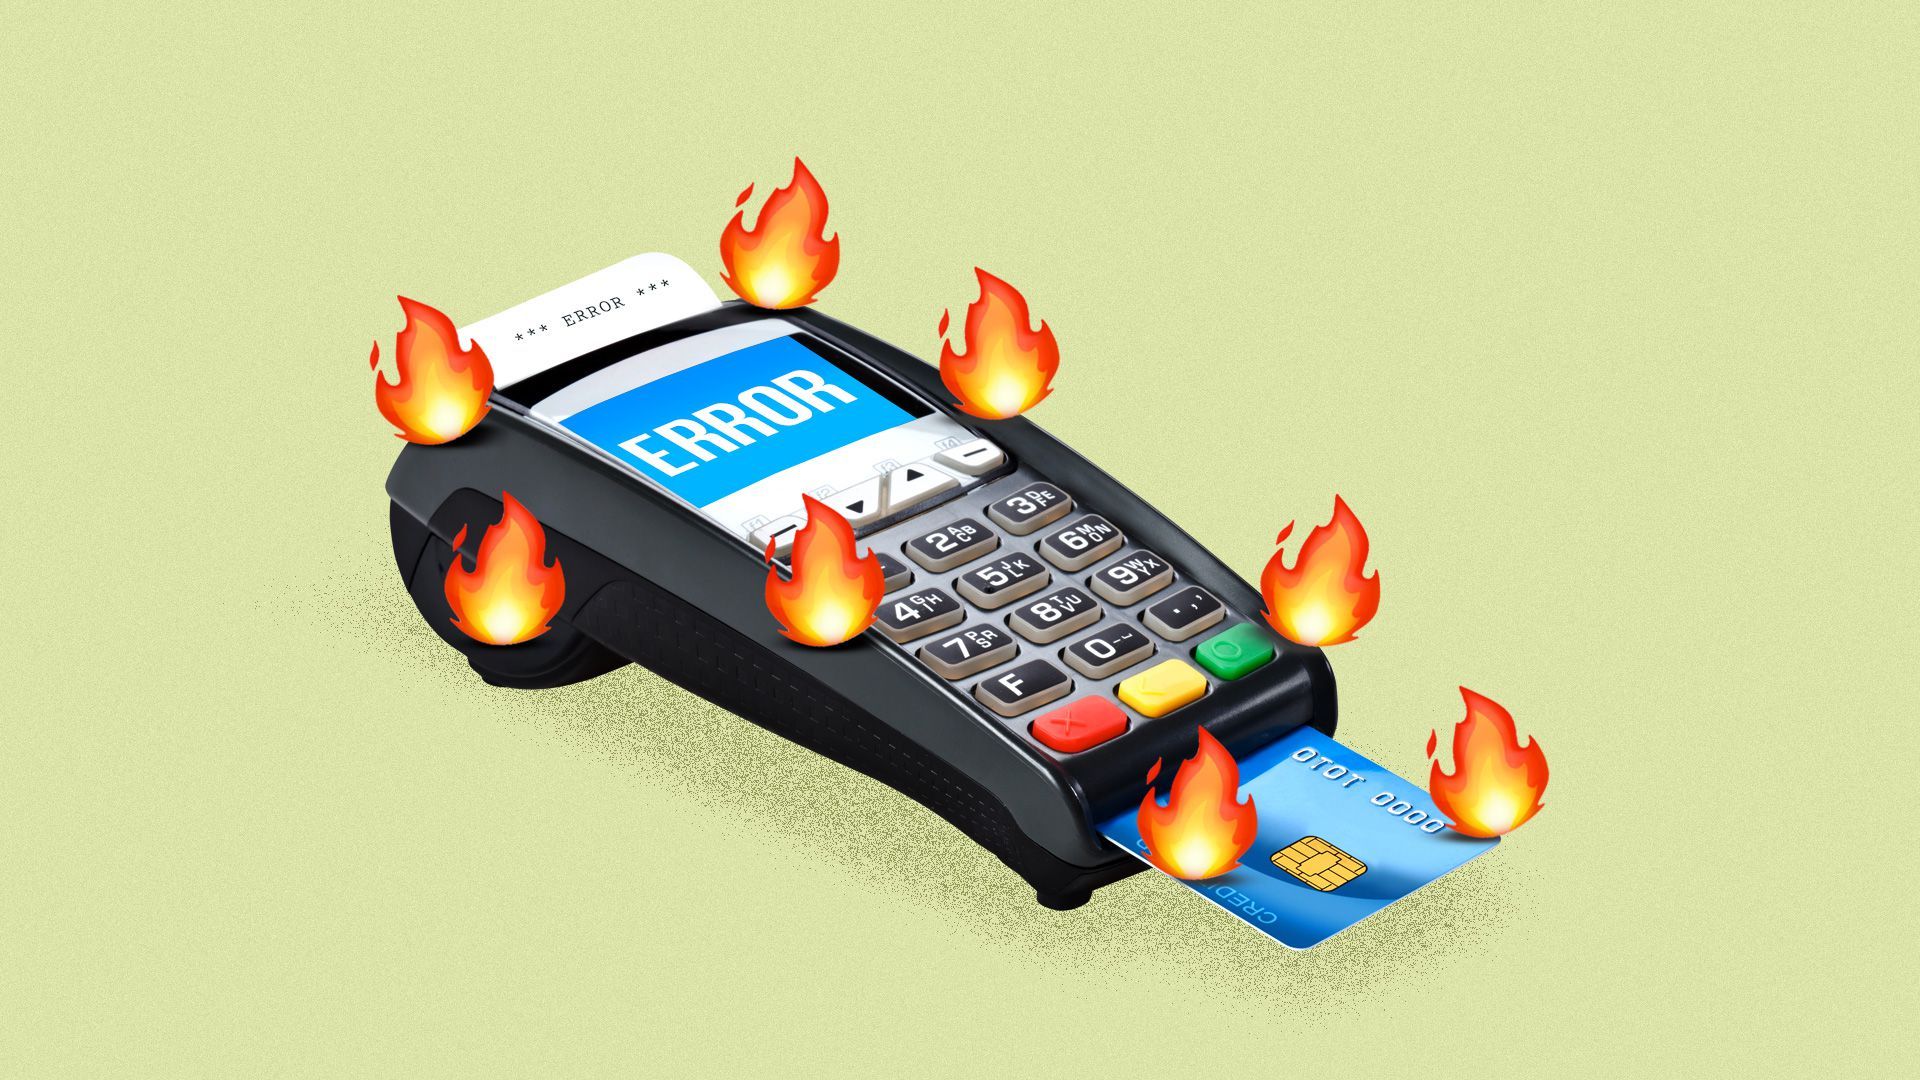 A credit card machine catching on fire